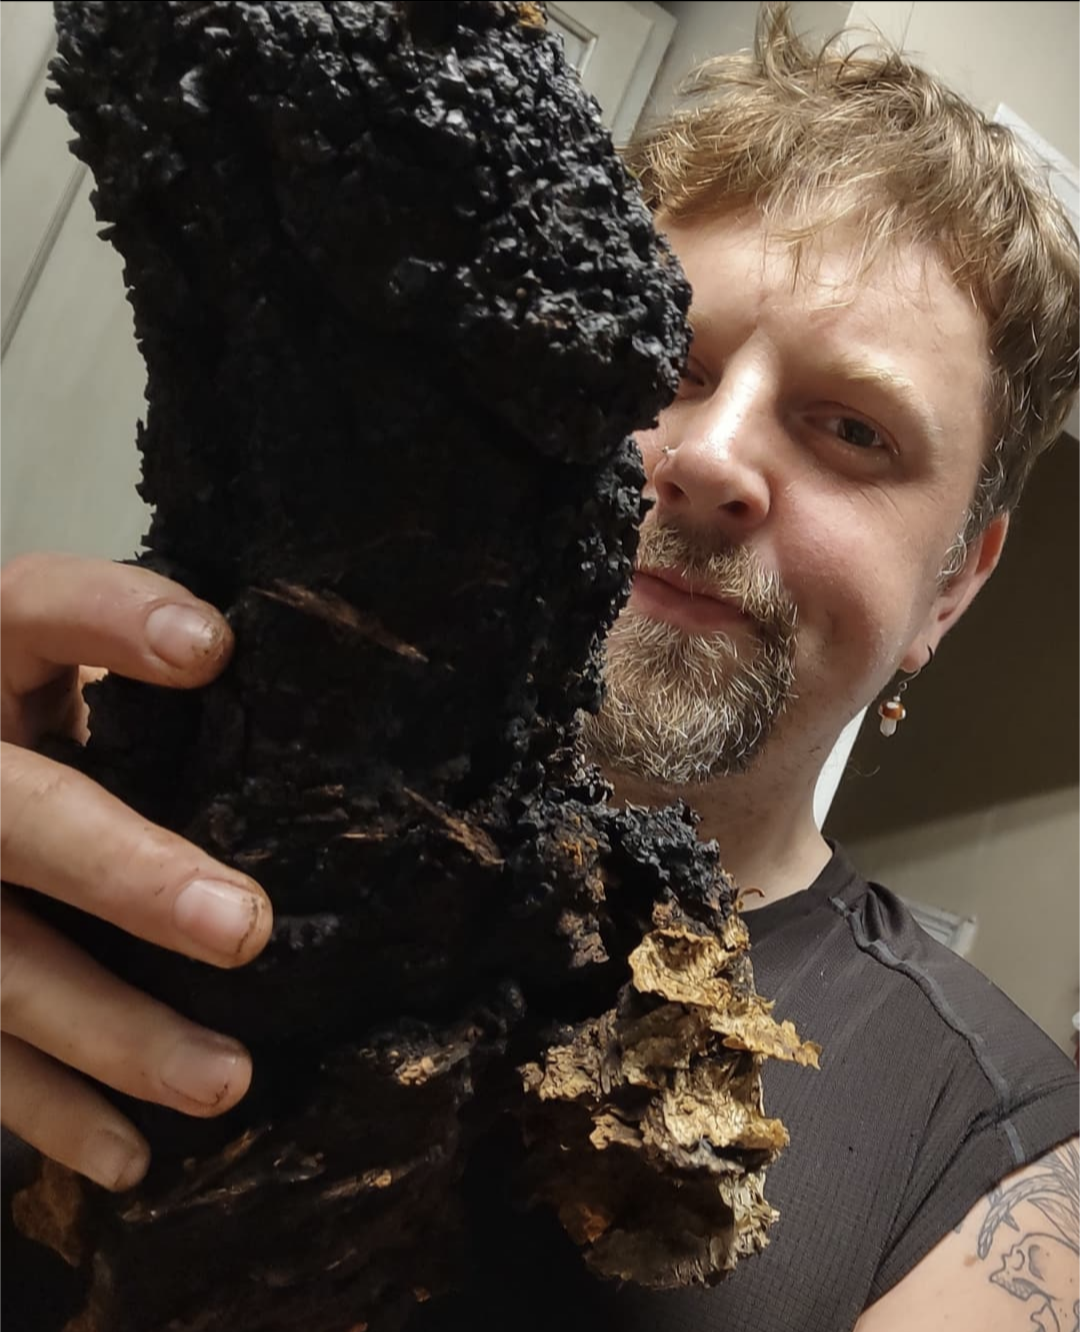 Debunking the Chaga Oxalate Myth: A Closer Look at Safety and Misinformation